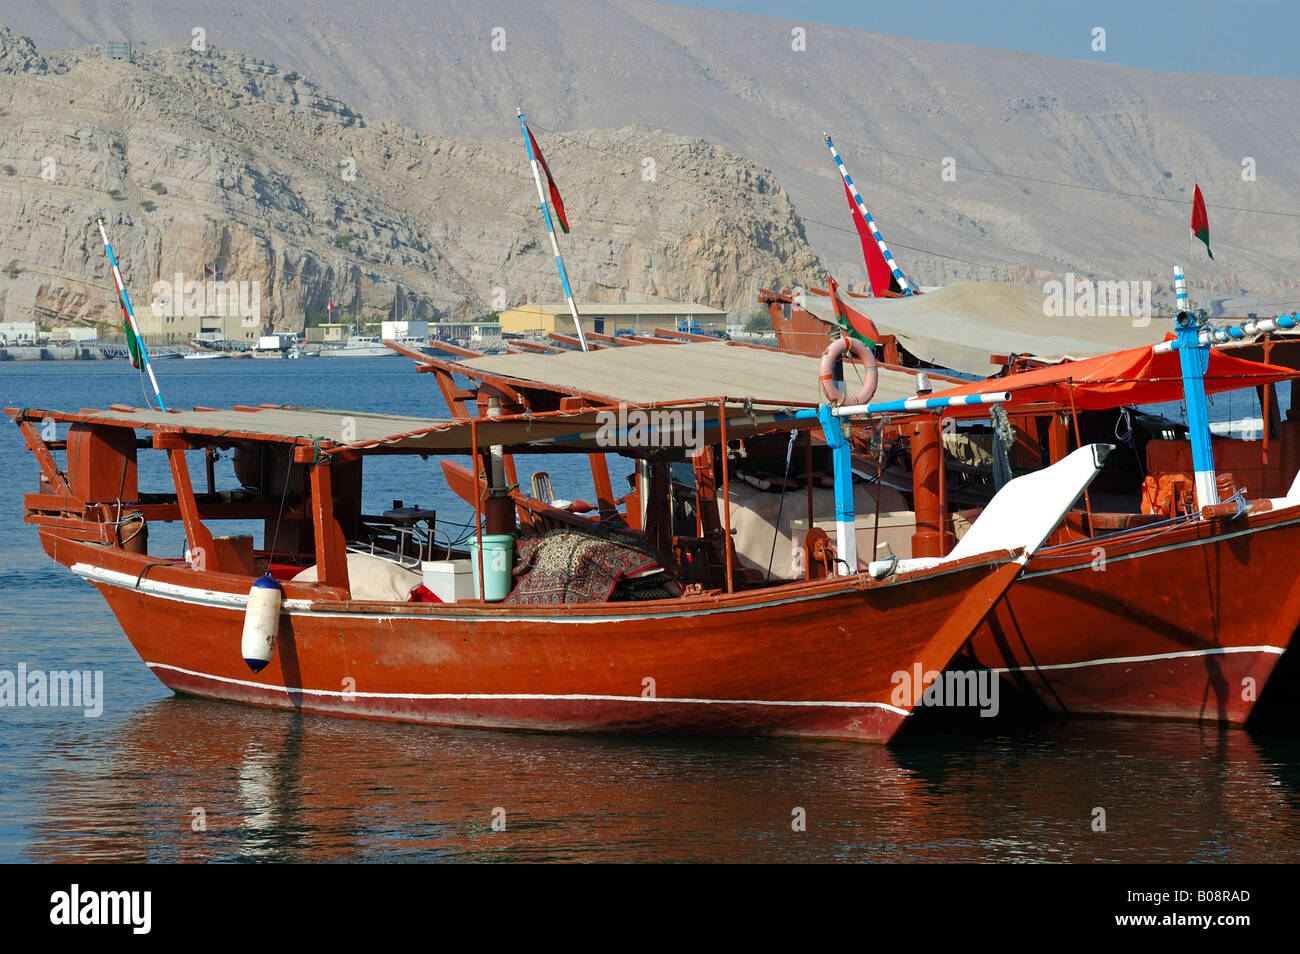 Traditional dhows in the harbour of Khasab, Musamdam, Oman, Middle East Stock Photo